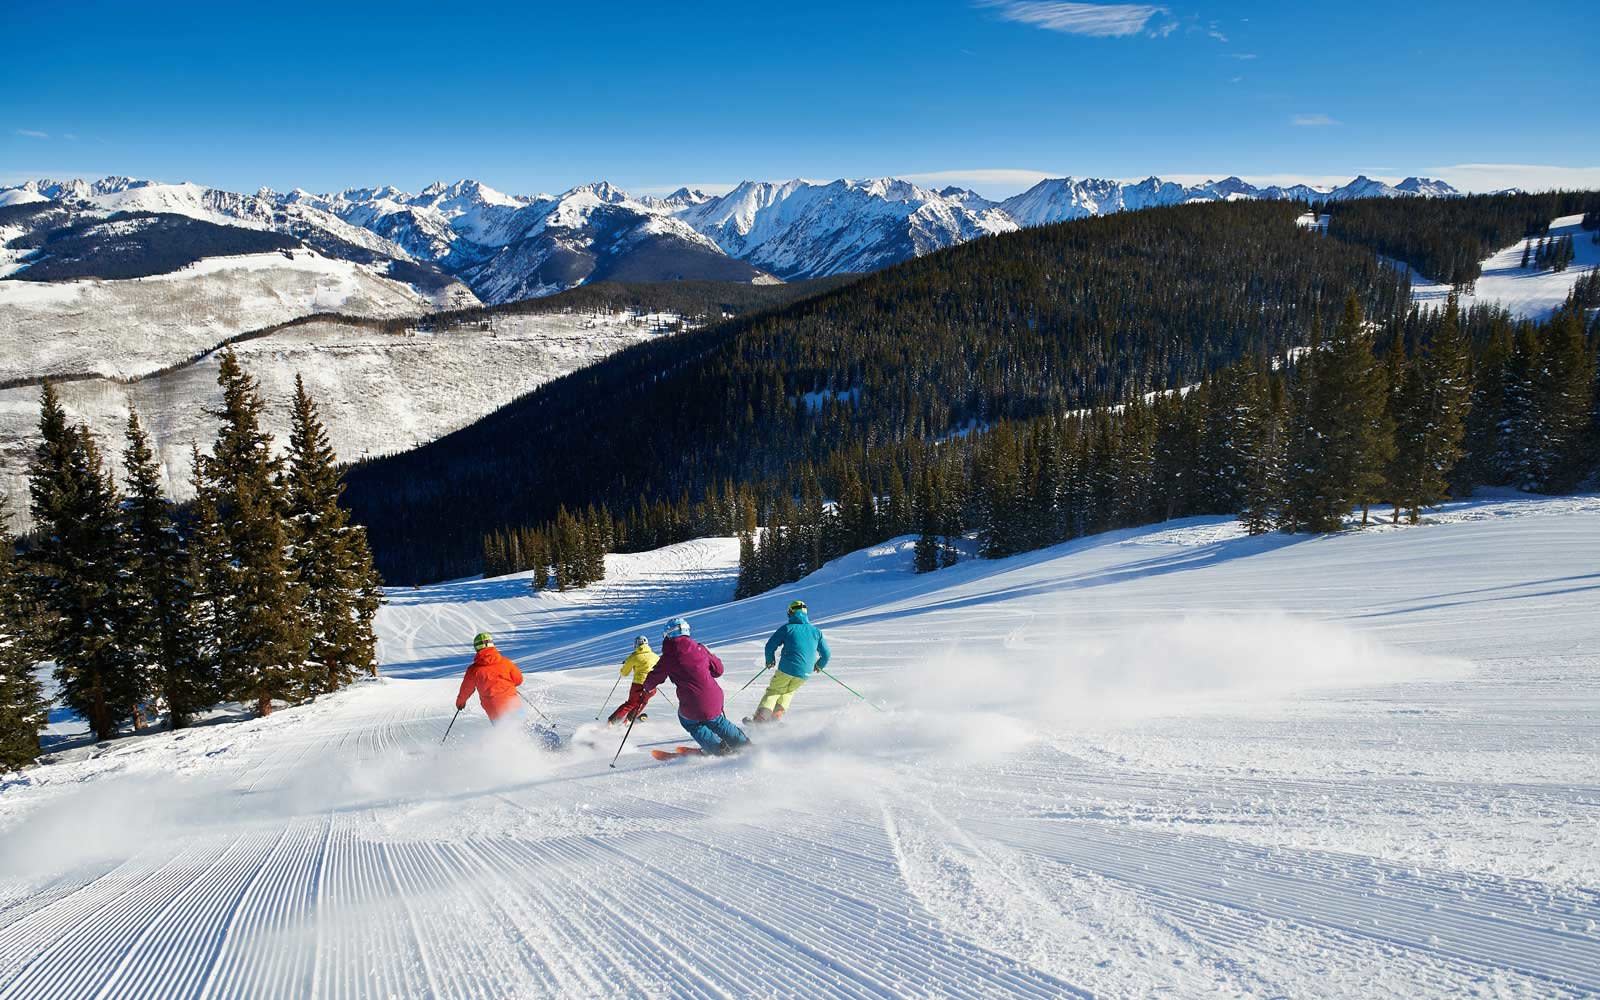 The Deadline to Buy the Epic Pass Is Almost Here so You’ll Need to Act Fast